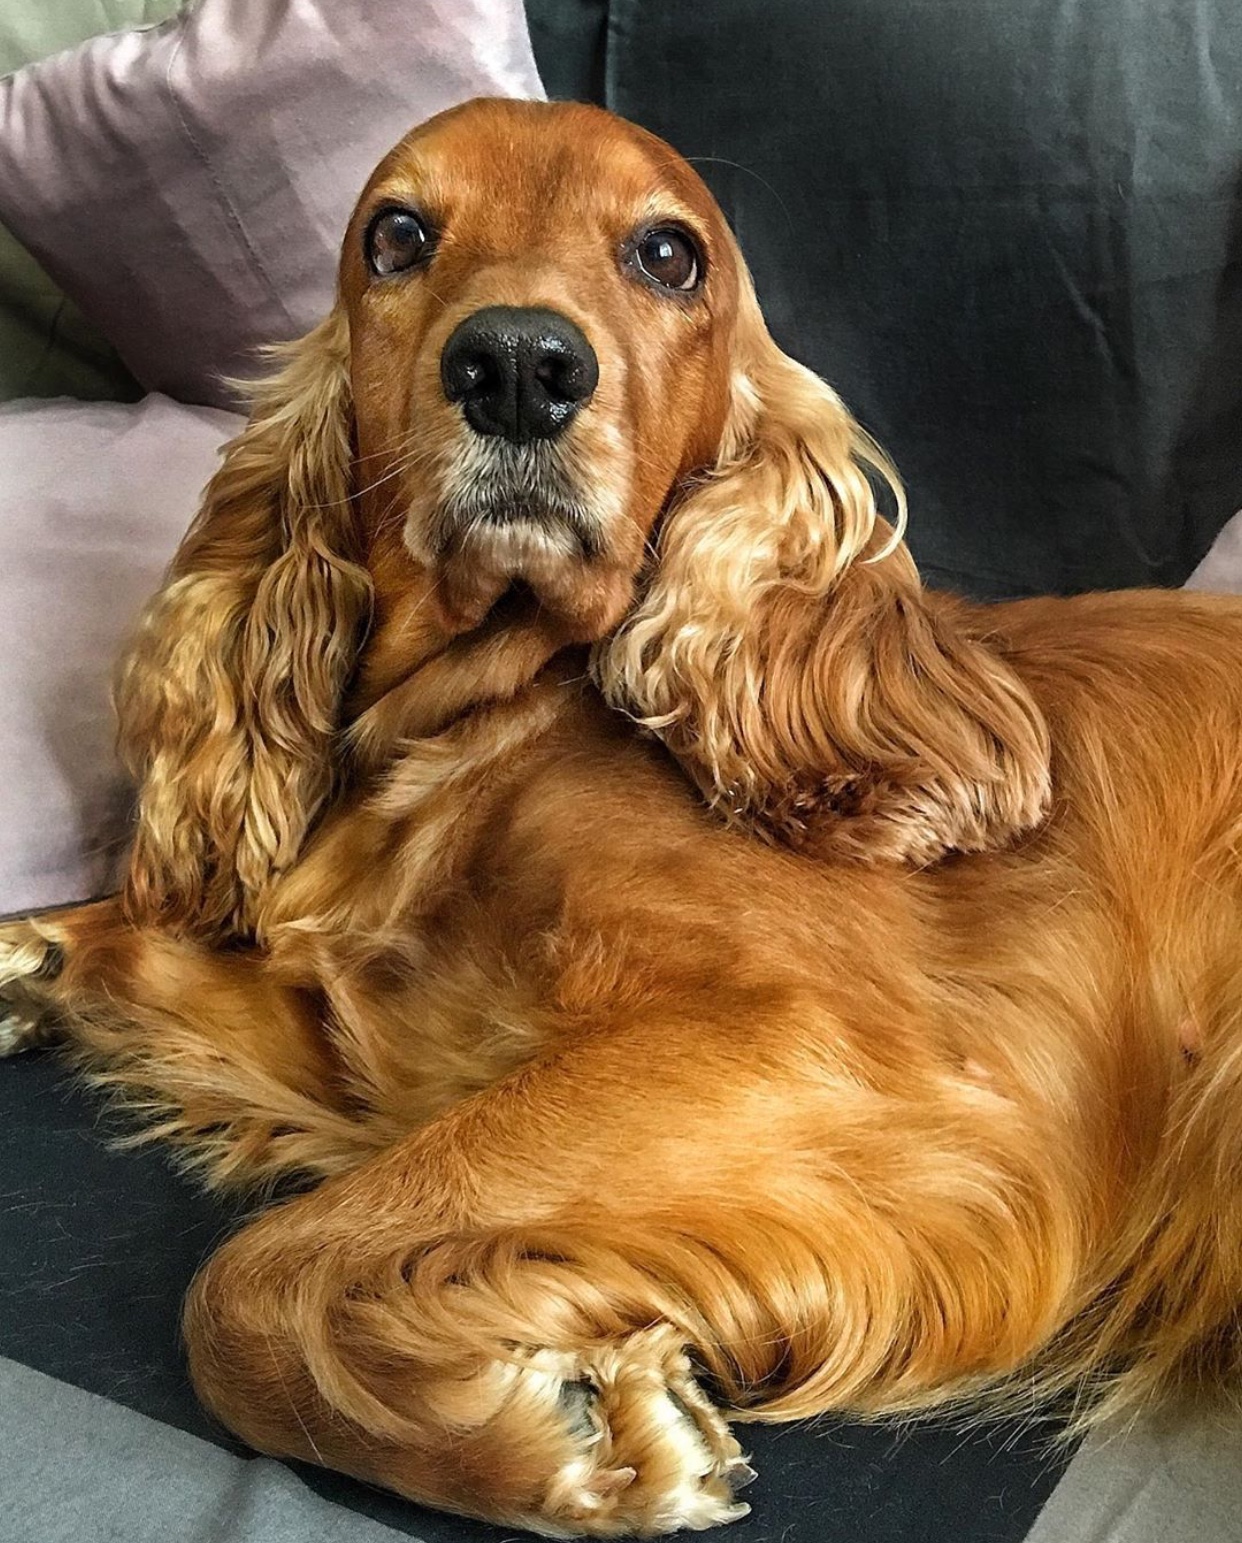 A Cocker Spaniel lying on the couch